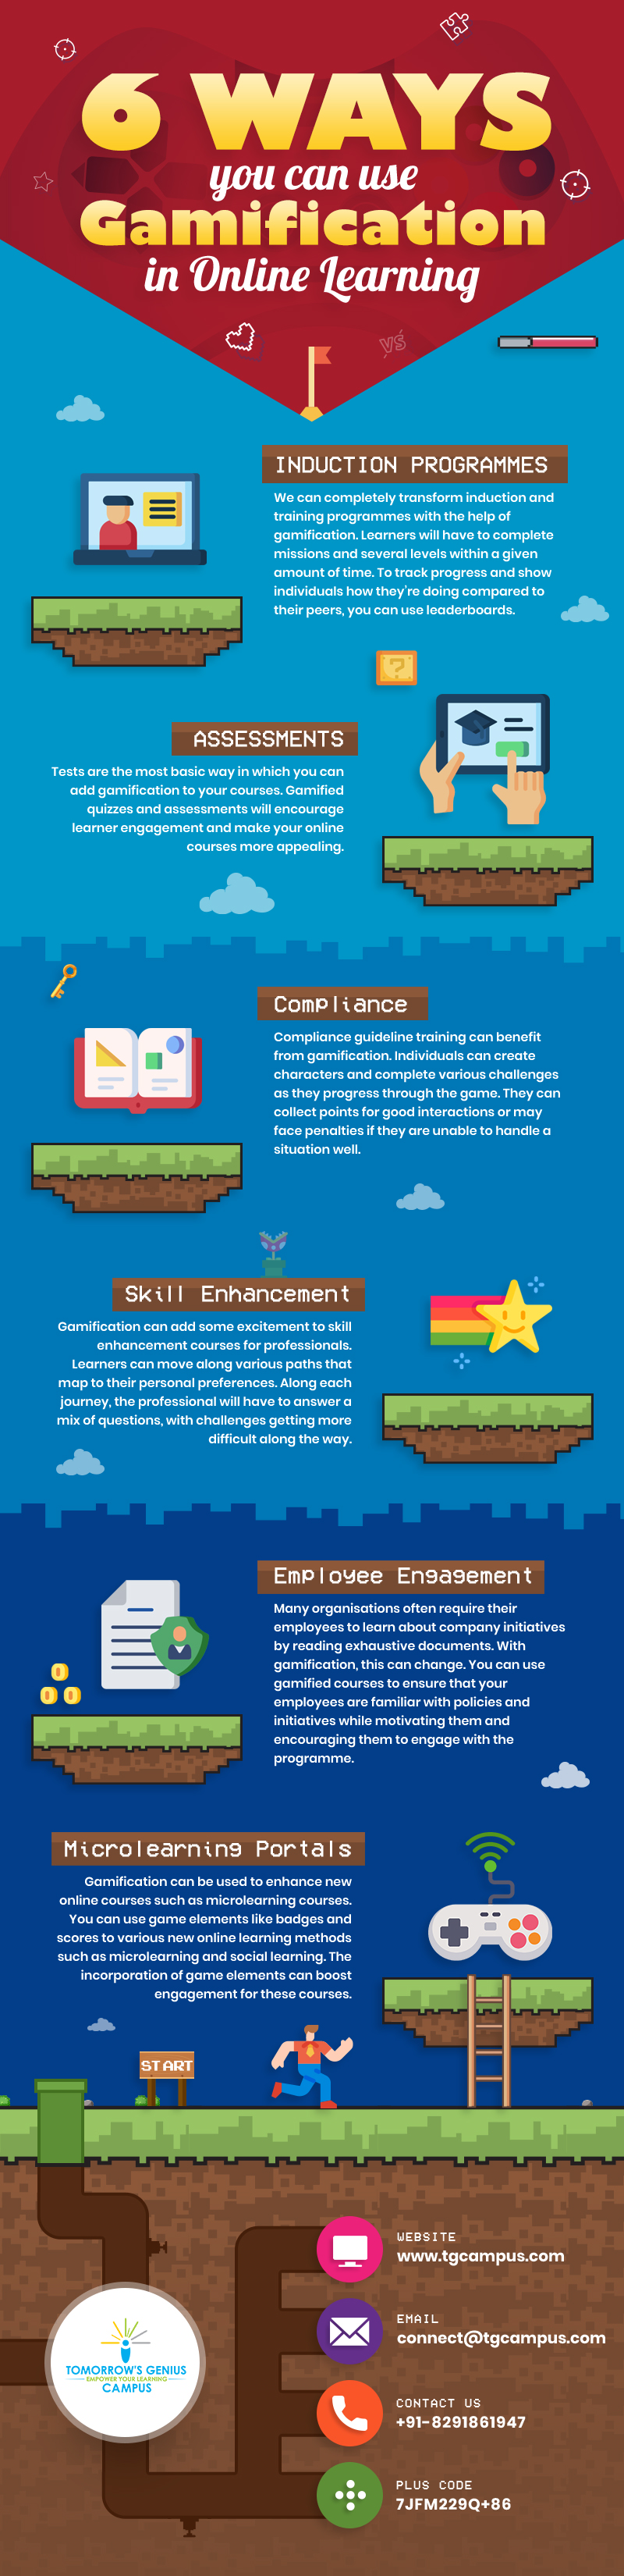 Infographic - Gamification in Online Learning